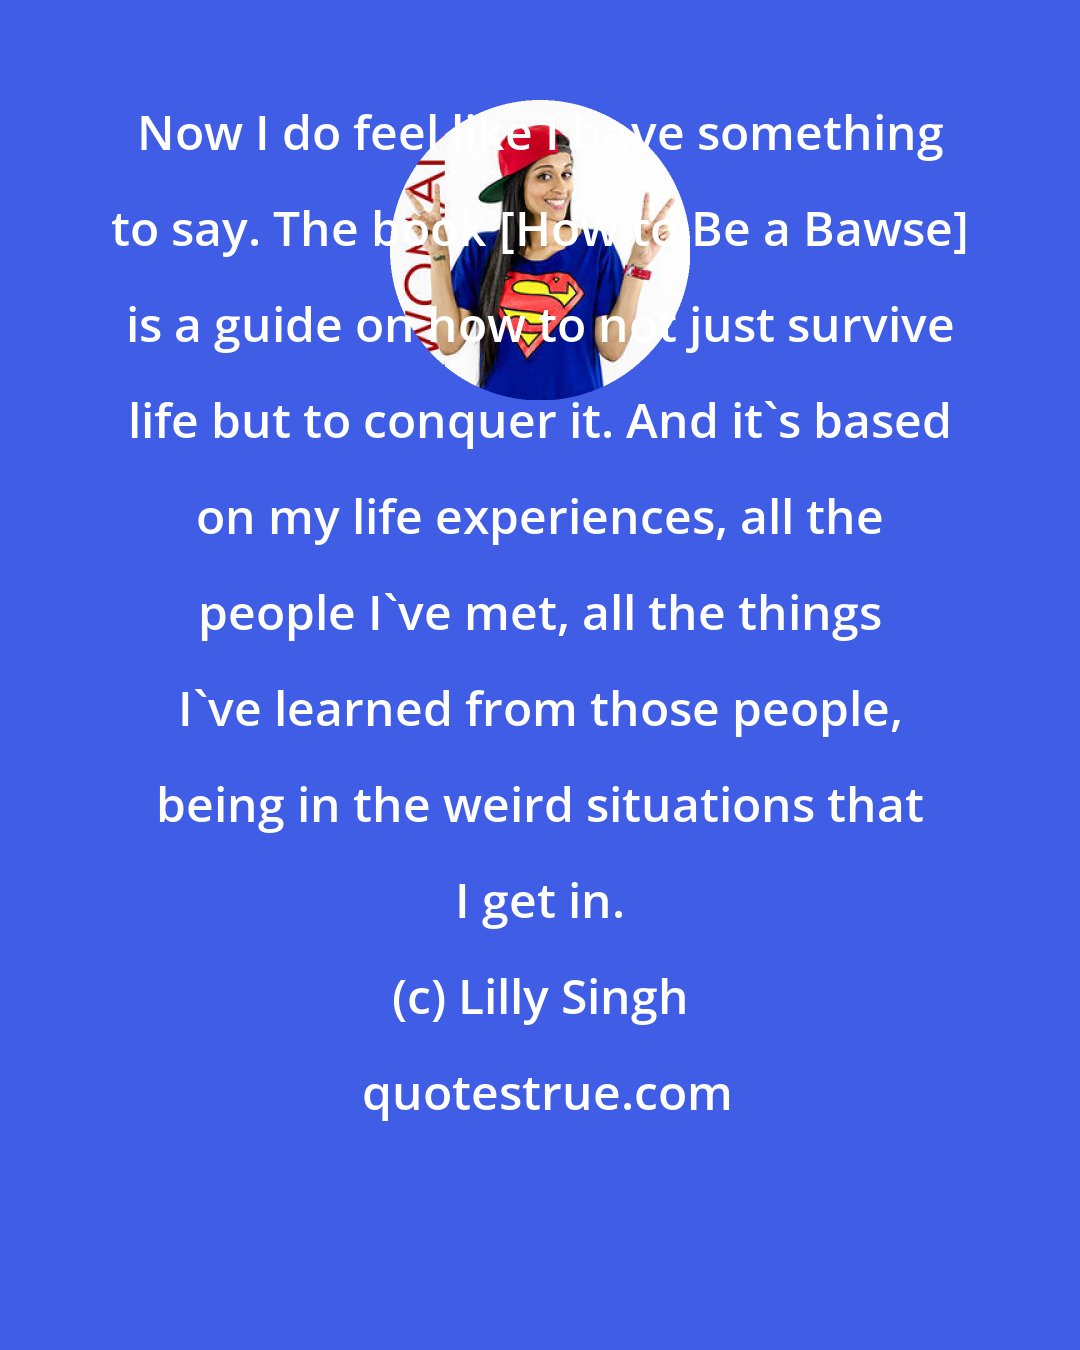 Lilly Singh: Now I do feel like I have something to say. The book [How to Be a Bawse] is a guide on how to not just survive life but to conquer it. And it's based on my life experiences, all the people I've met, all the things I've learned from those people, being in the weird situations that I get in.